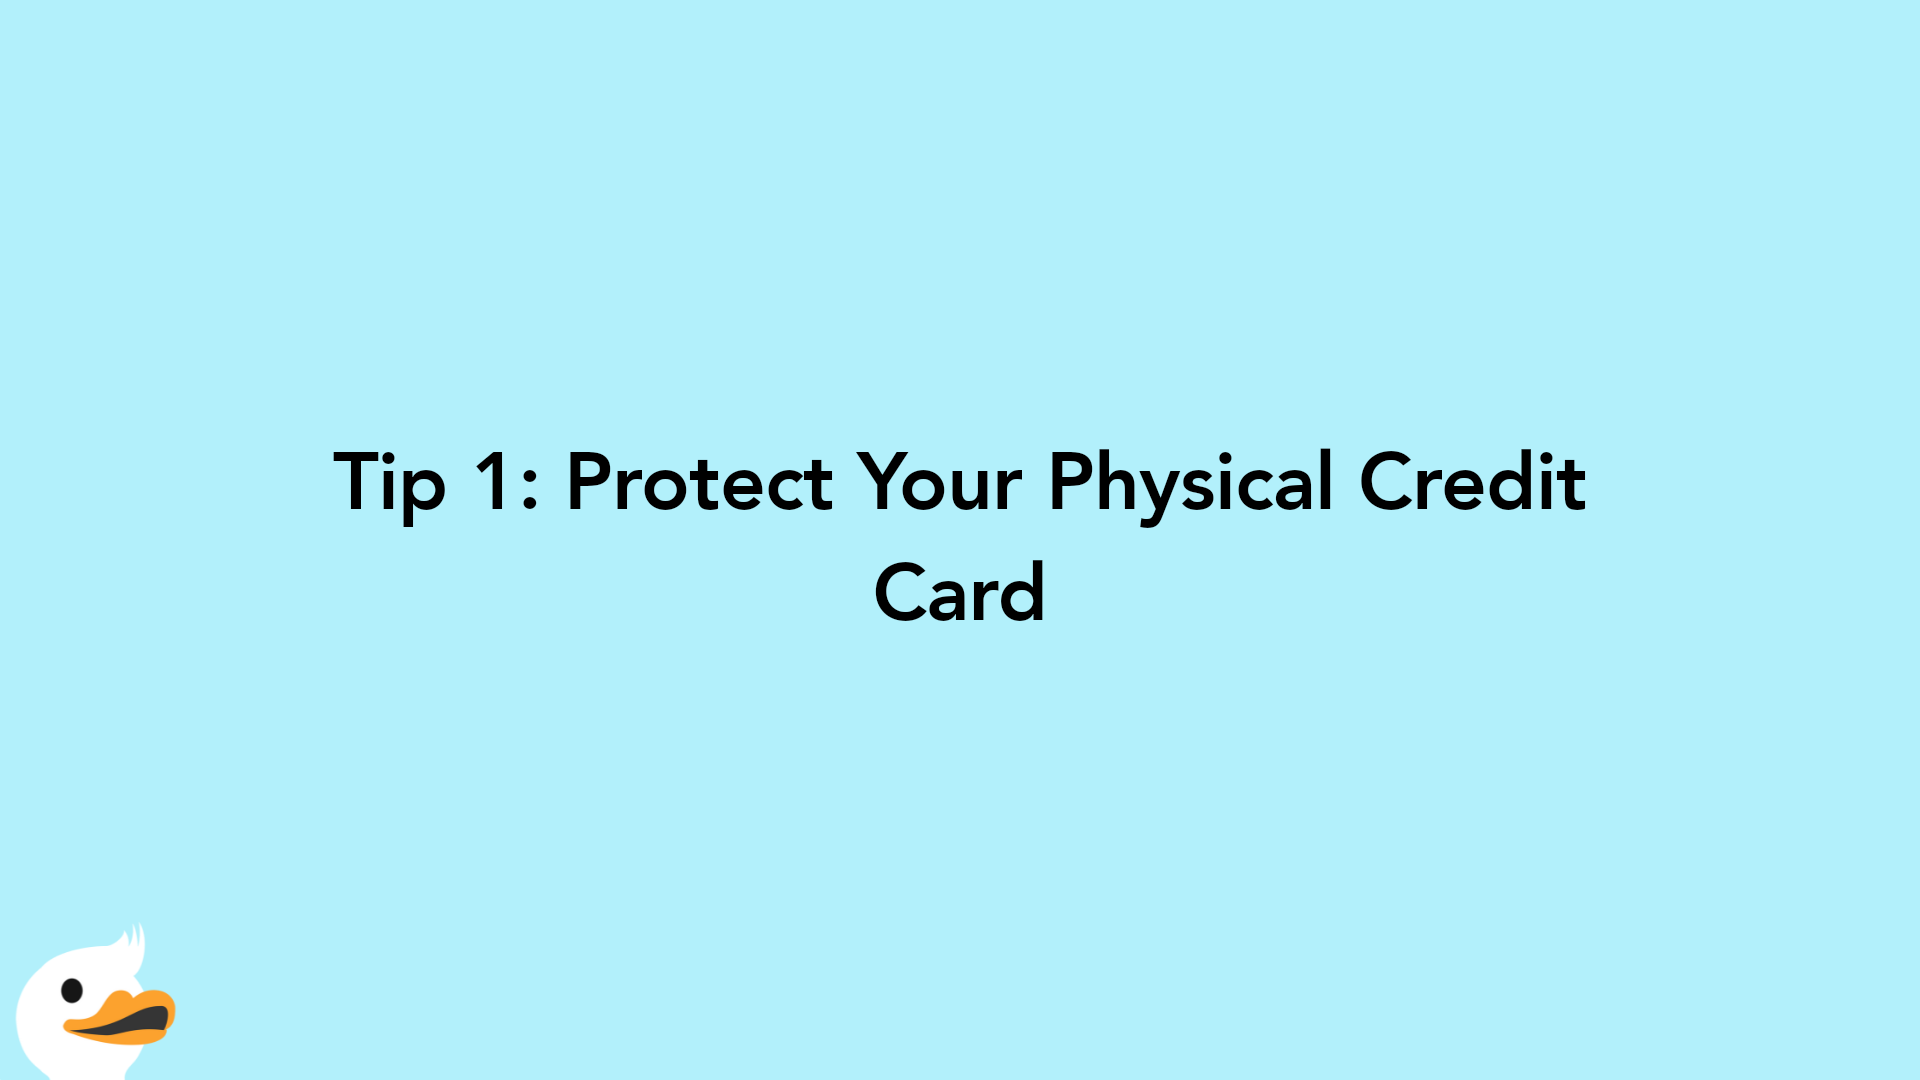 Tip 1: Protect Your Physical Credit Card